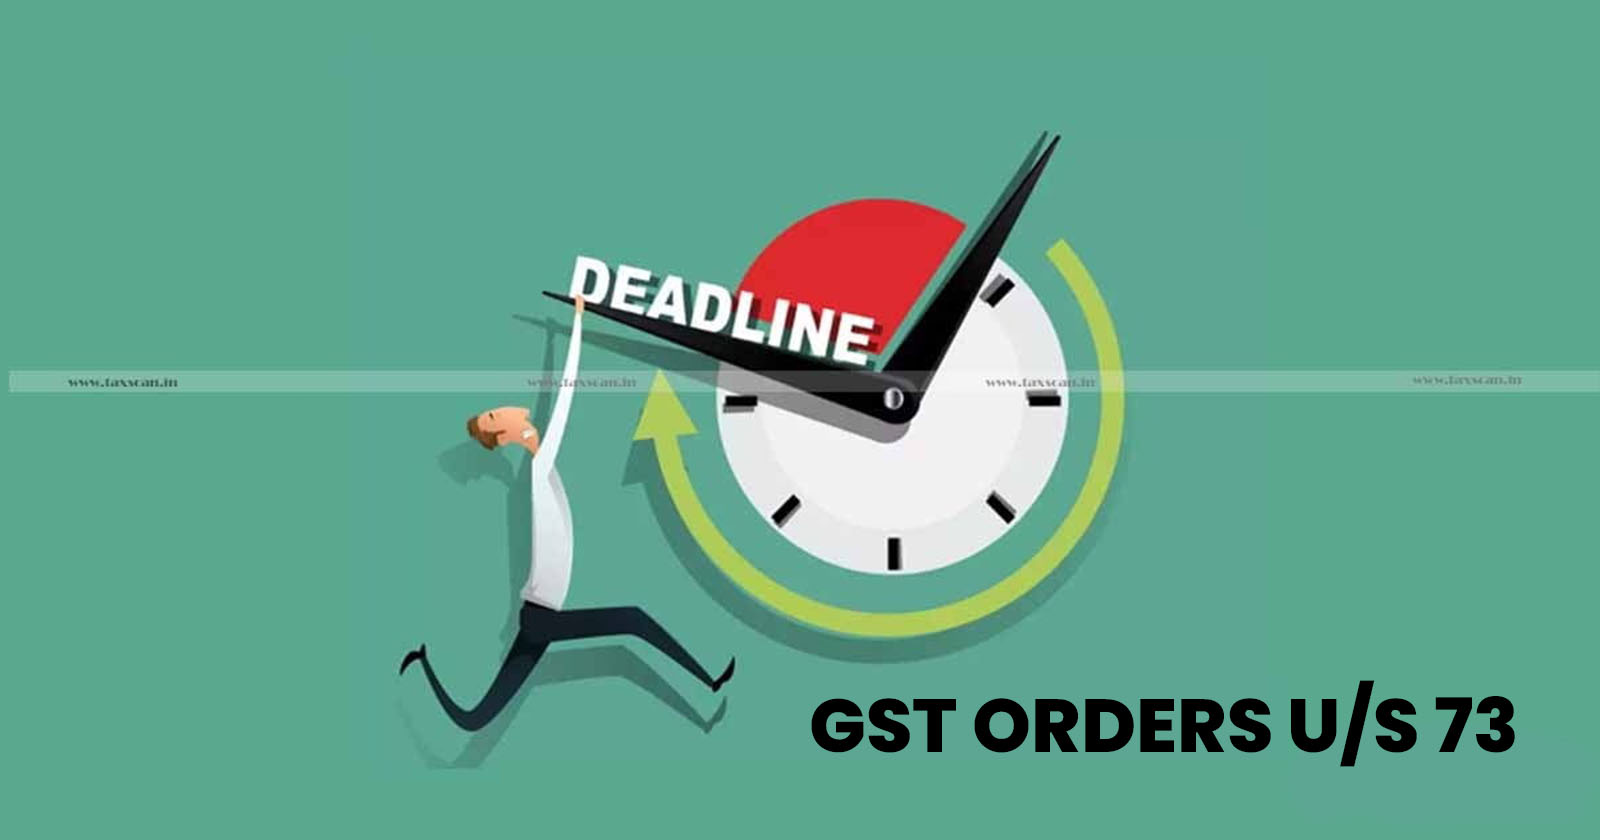 extended limitations override Statutory Time Limit - Uncovering the Potential Unconstitutionality - Notification Extending Deadline for GST Orders - TAXSCAN